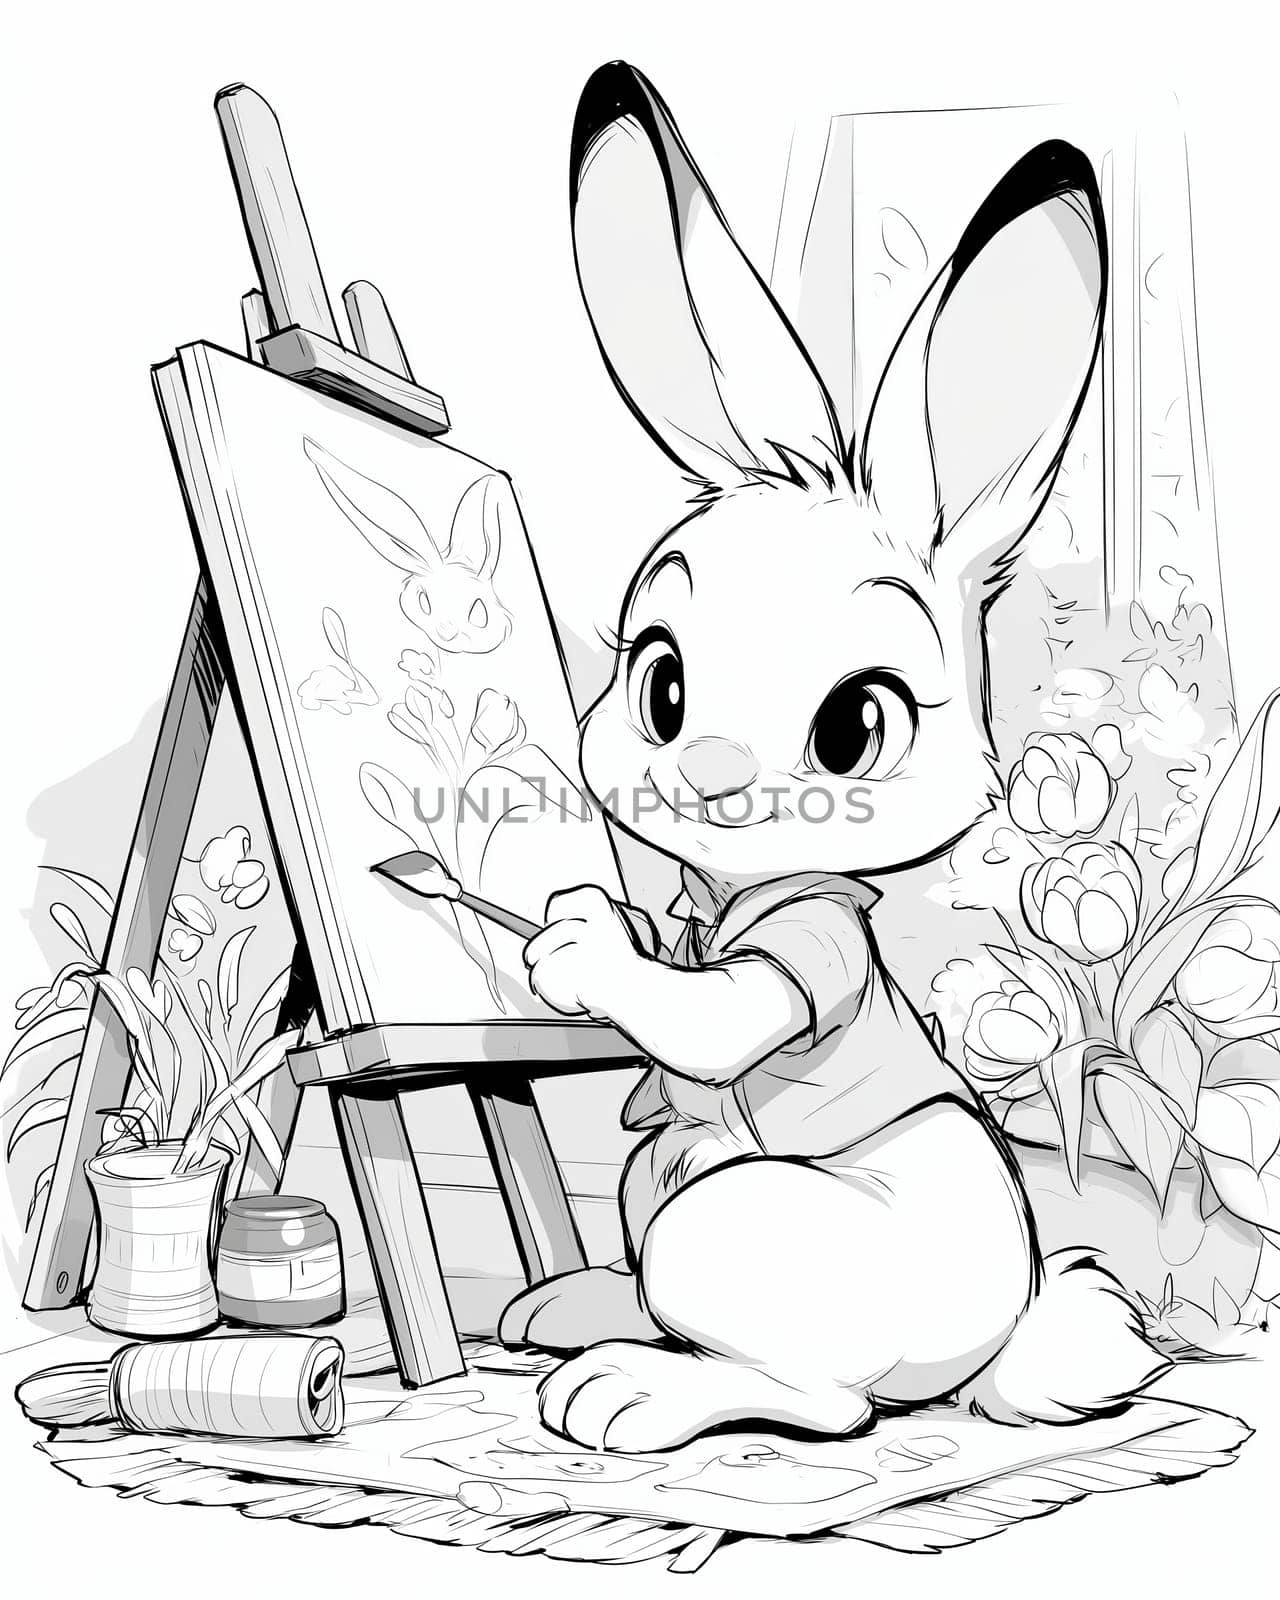 Coloring book for children, coloring animal, hare. by Fischeron